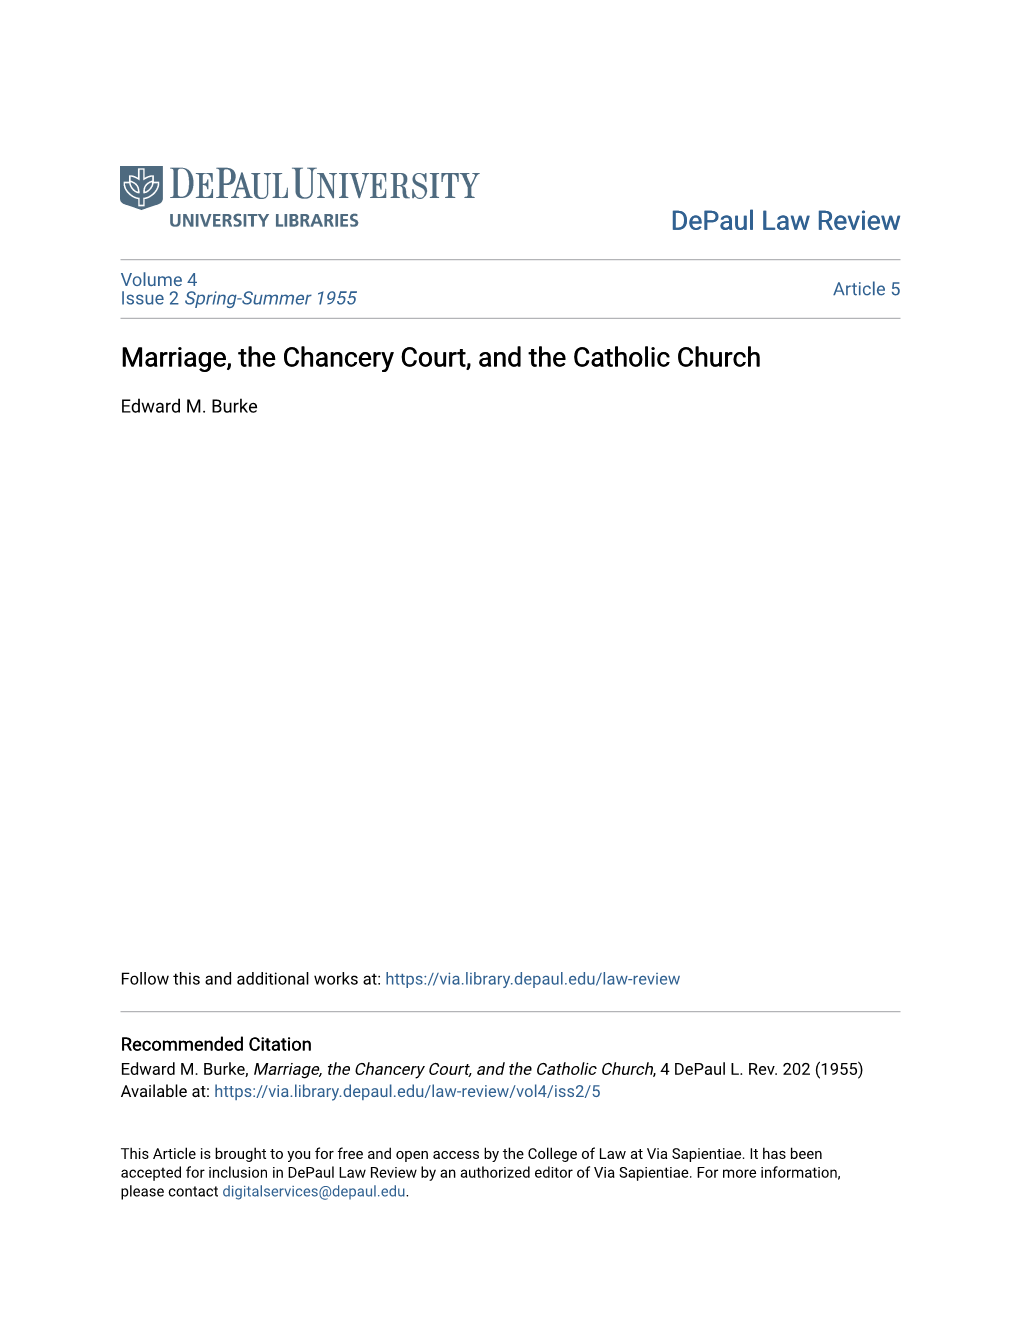 Marriage, the Chancery Court, and the Catholic Church